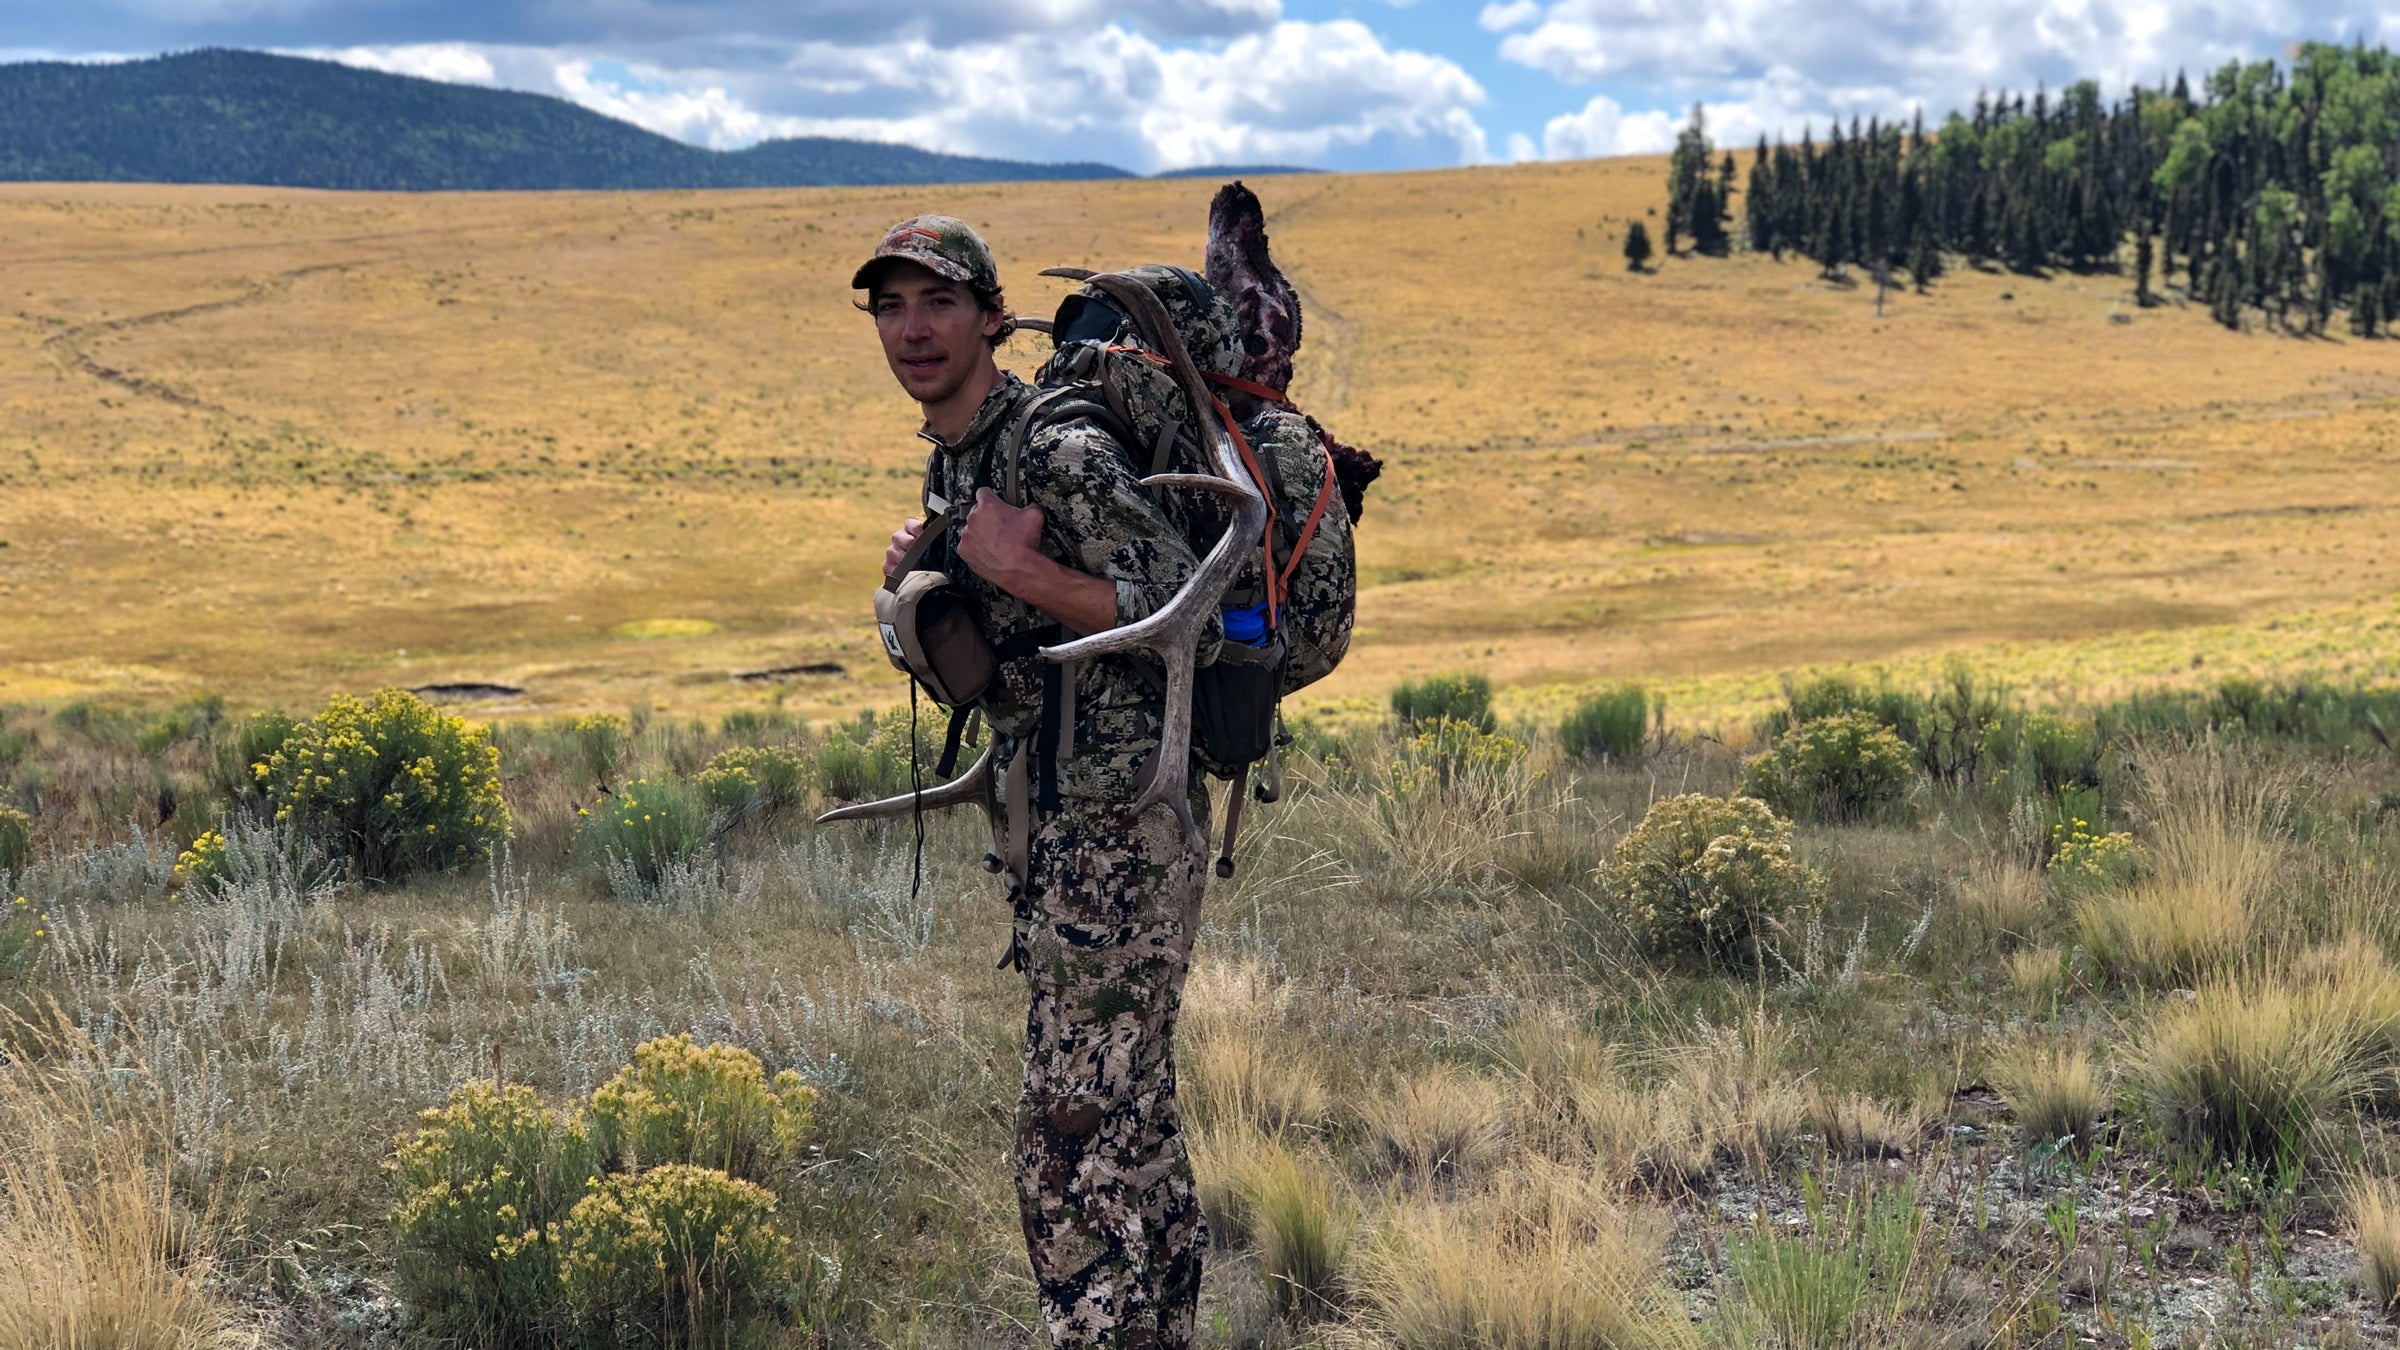 Sitka Hunting Pants Review Mountain Timberline Apex  More  Man Makes  Fire